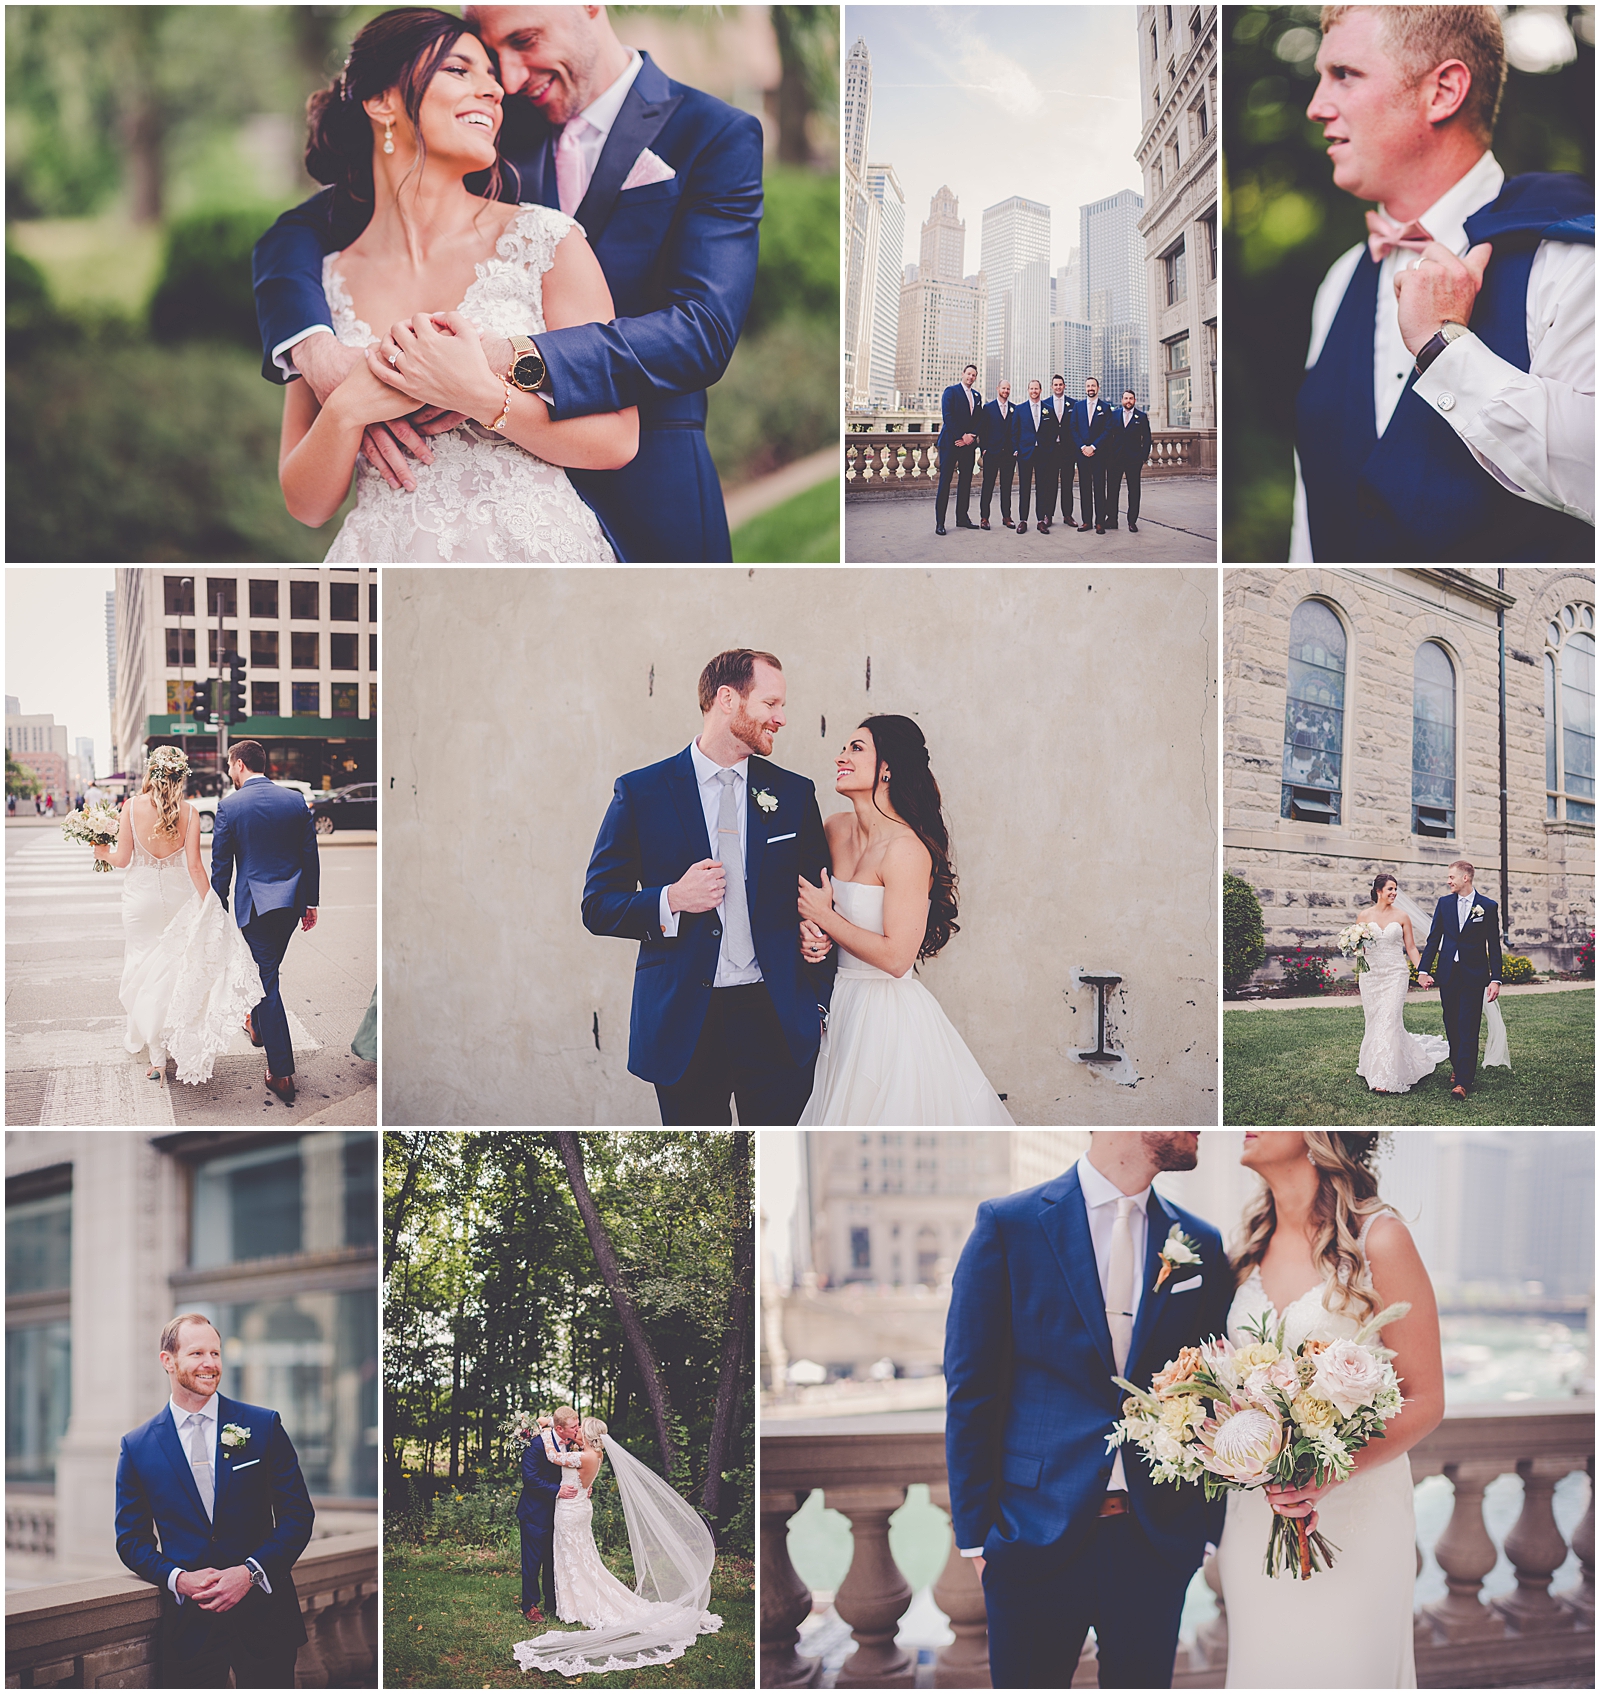 The Pantone color of the year 2020 - classic blue - Chicagoland wedding photographer Kara Evans Photographer's take on the 2020 Pantone of the year.